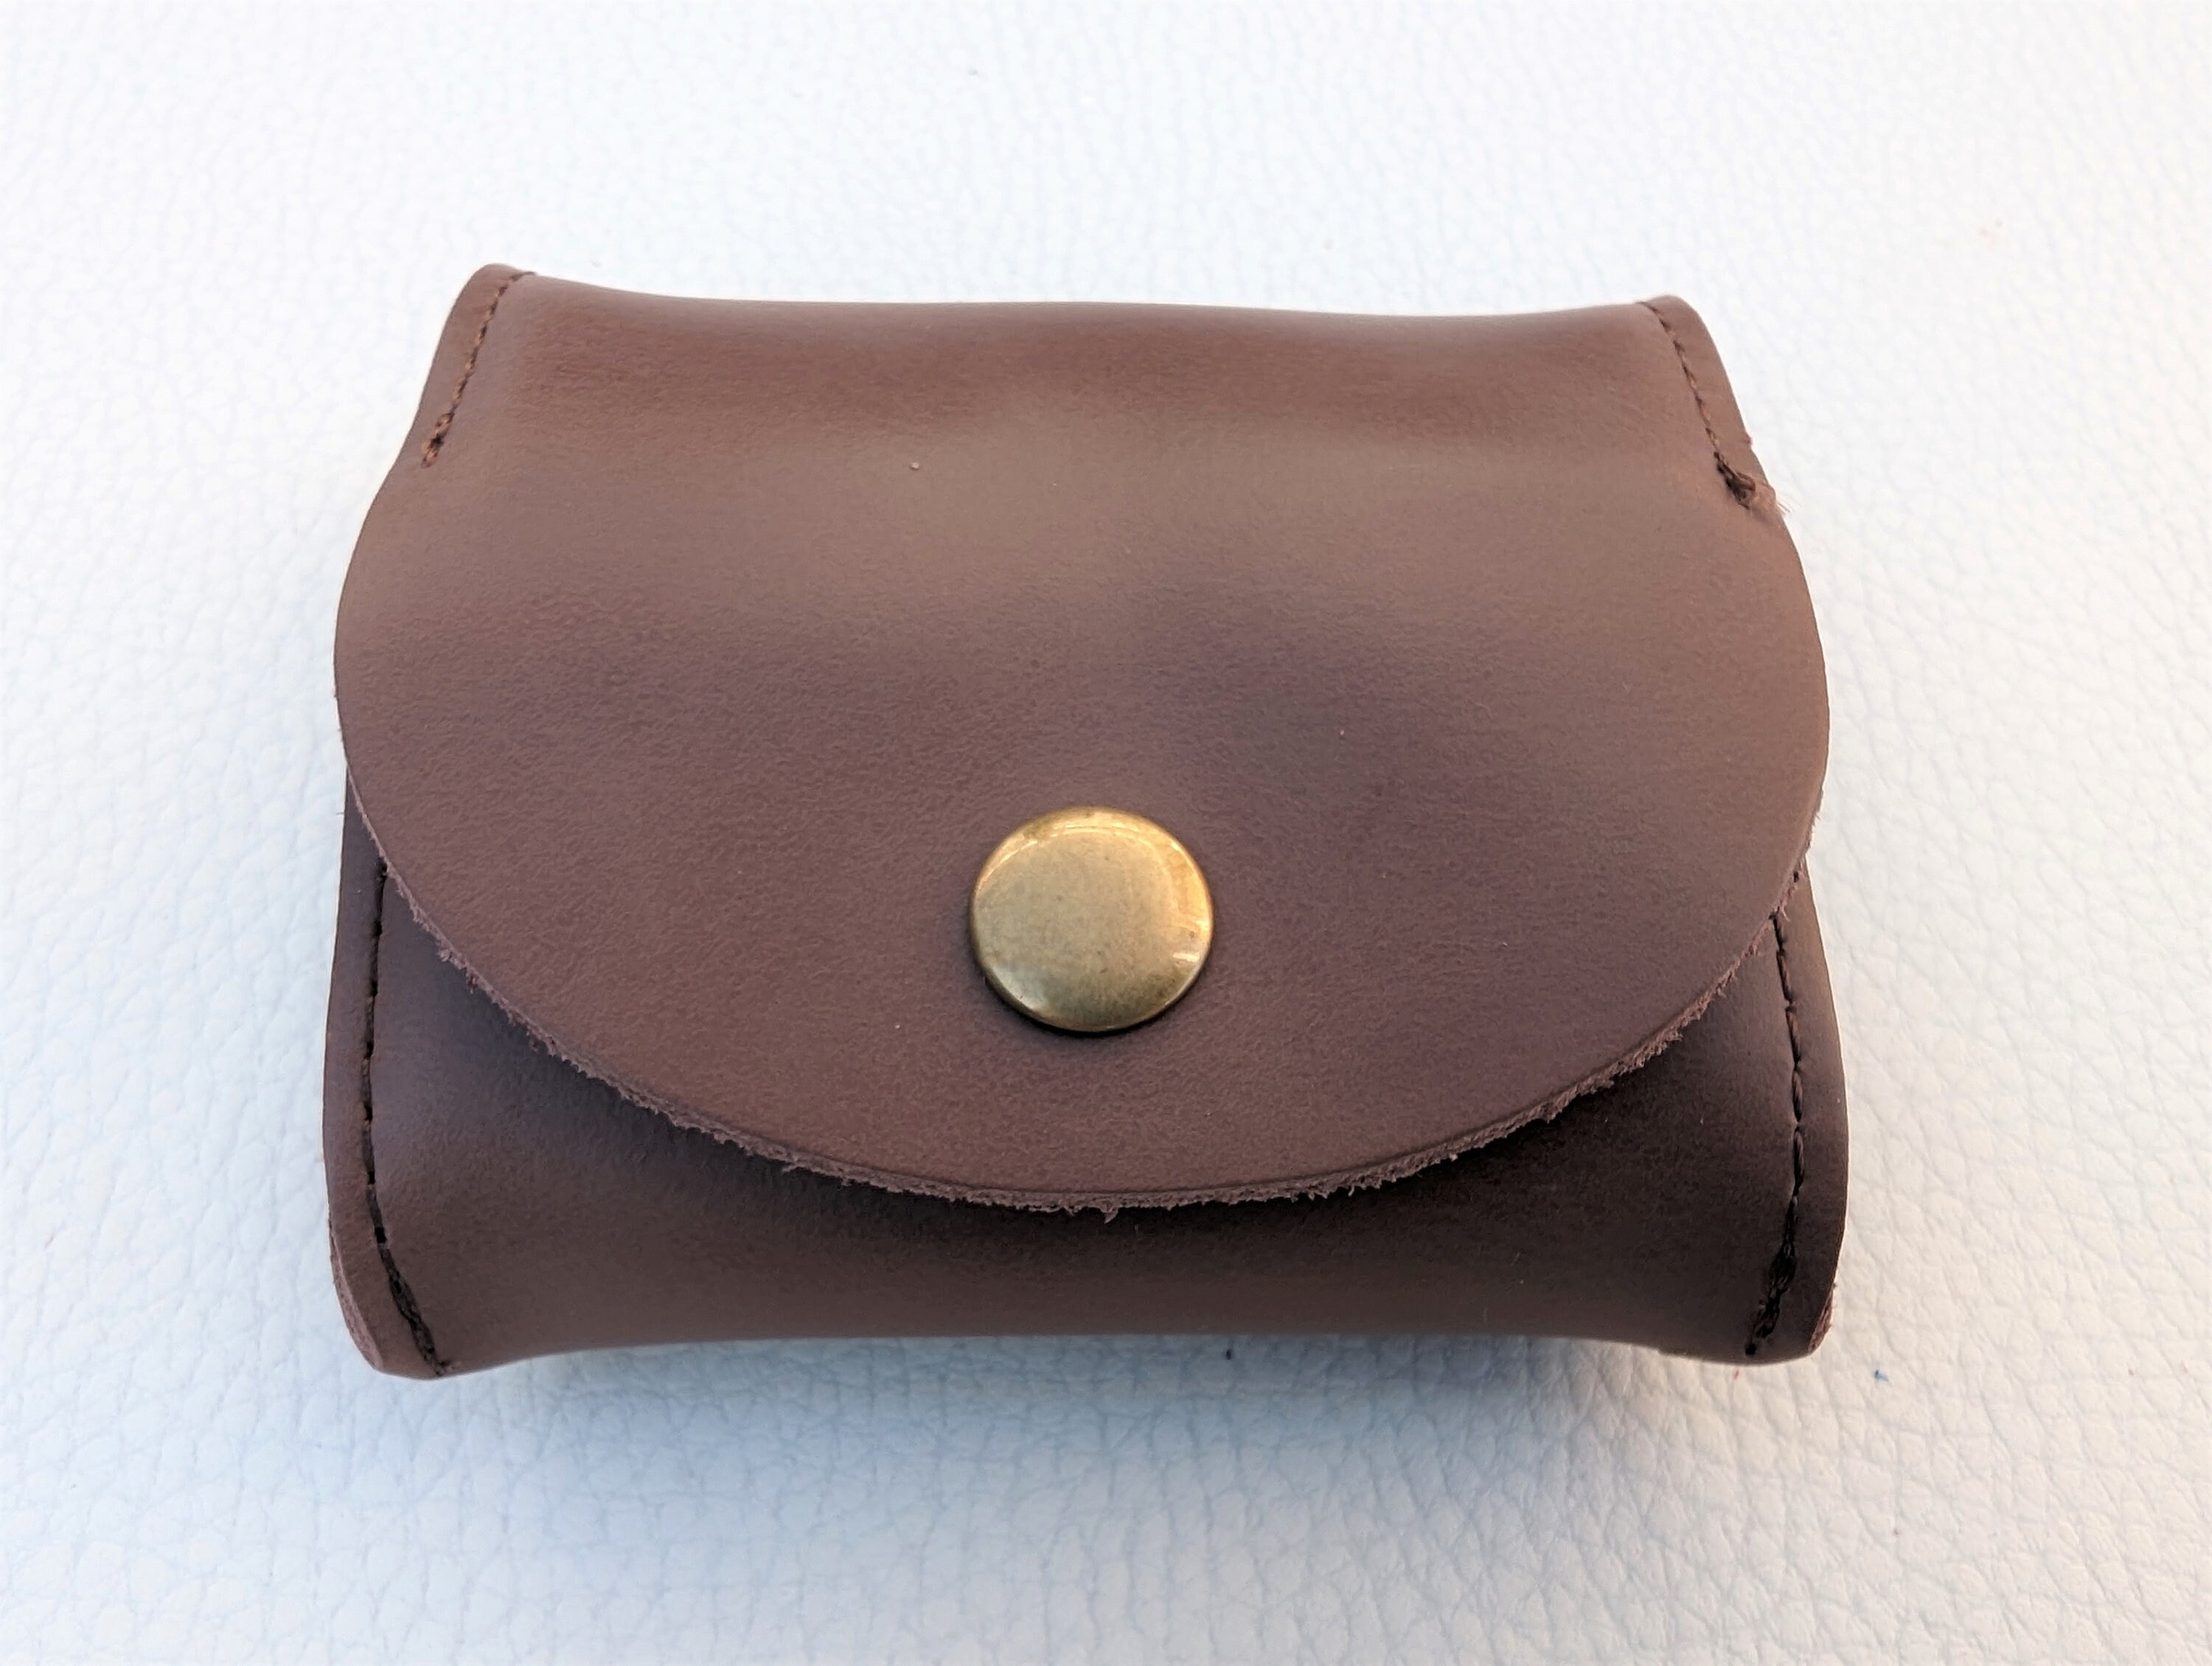 Real Leather Coin Purse, Lovely Soft Genuine Leather, Press Stud Fastening, Leather Coin Wallet, Small Folding Pouch, Earphone Case